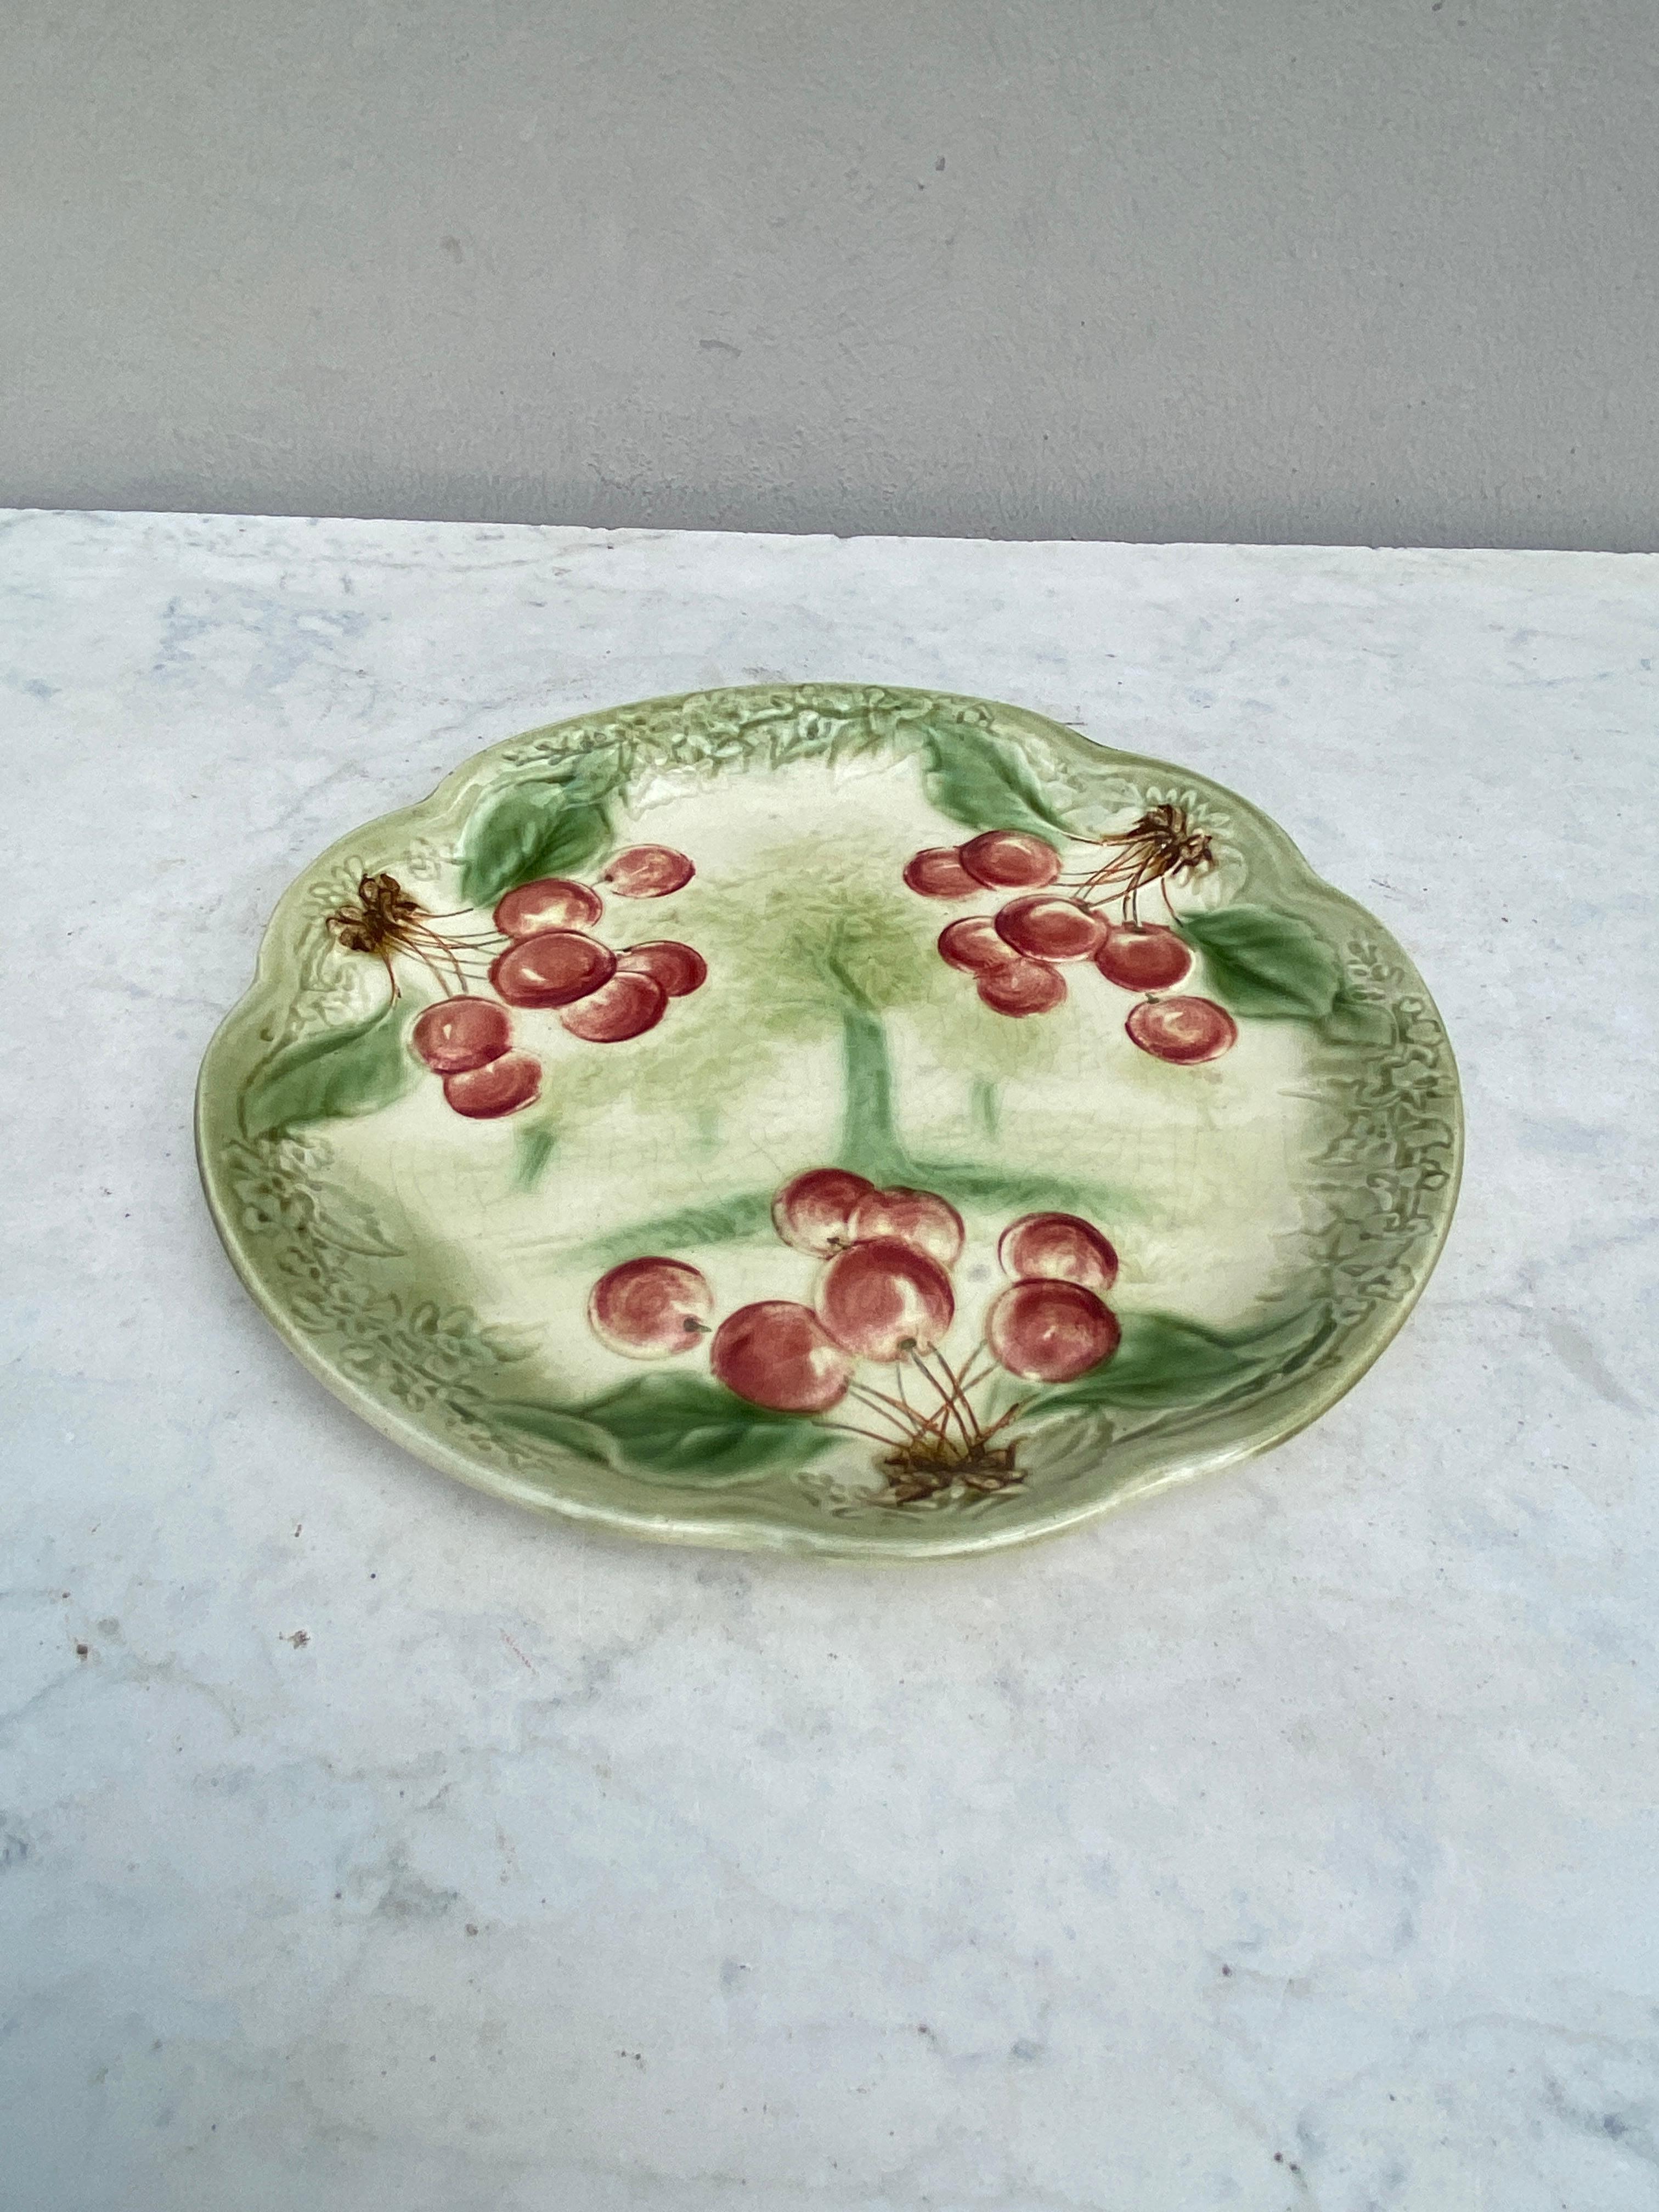 19th century Majolica Cherries Plate signed Choisy Le Roi.
Made for Higgins & Setter New York.
The Higgins & Seiter Company of New York City began selling decorations for the table, including rich-cut glass in 1887. By 1891 the firm was